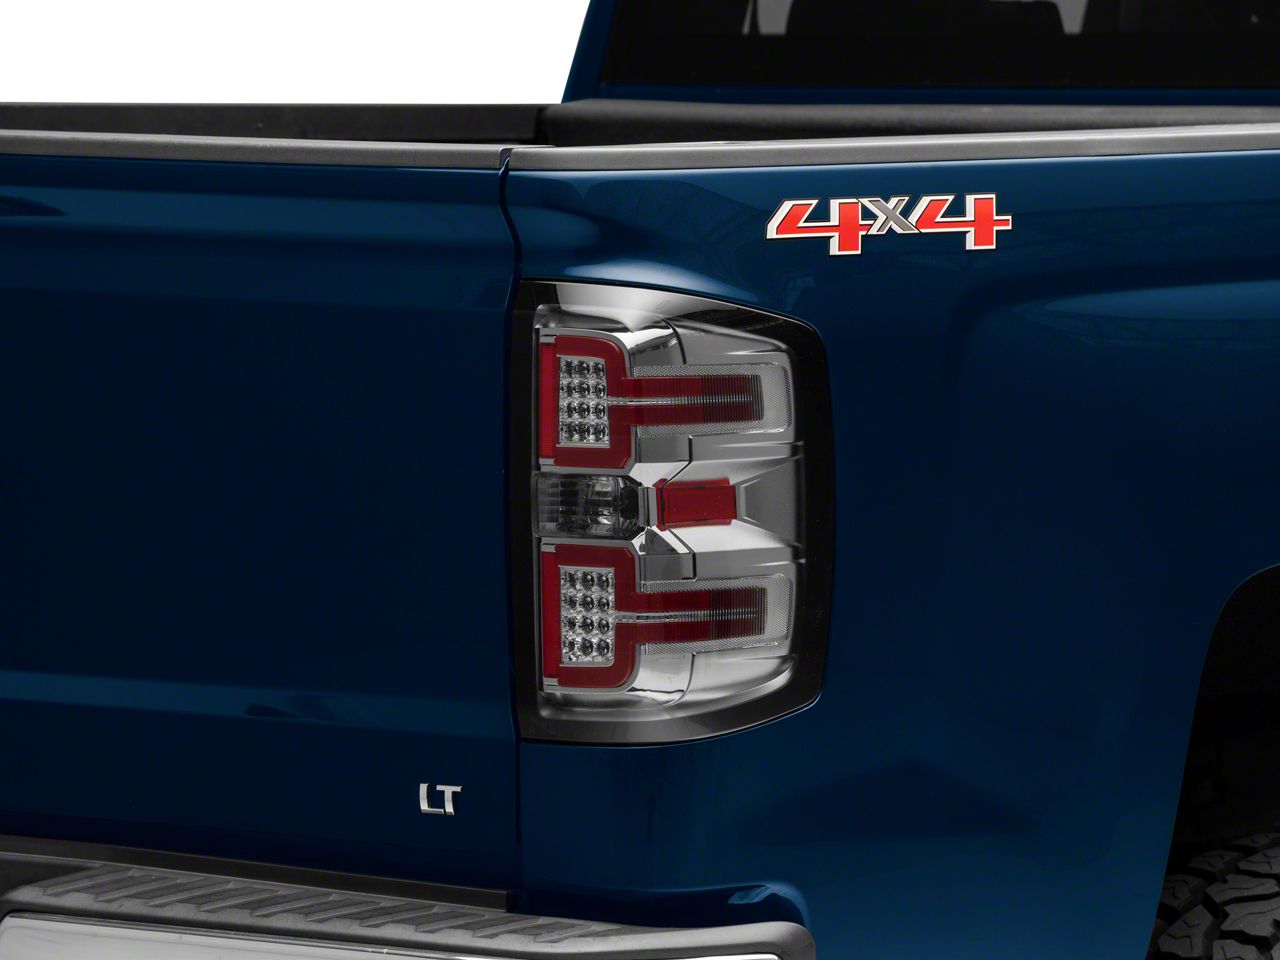 For 14-17 Silverado Door Handle Chrome Cover+Taillight+Tailgate W/Cam+3rd Brake